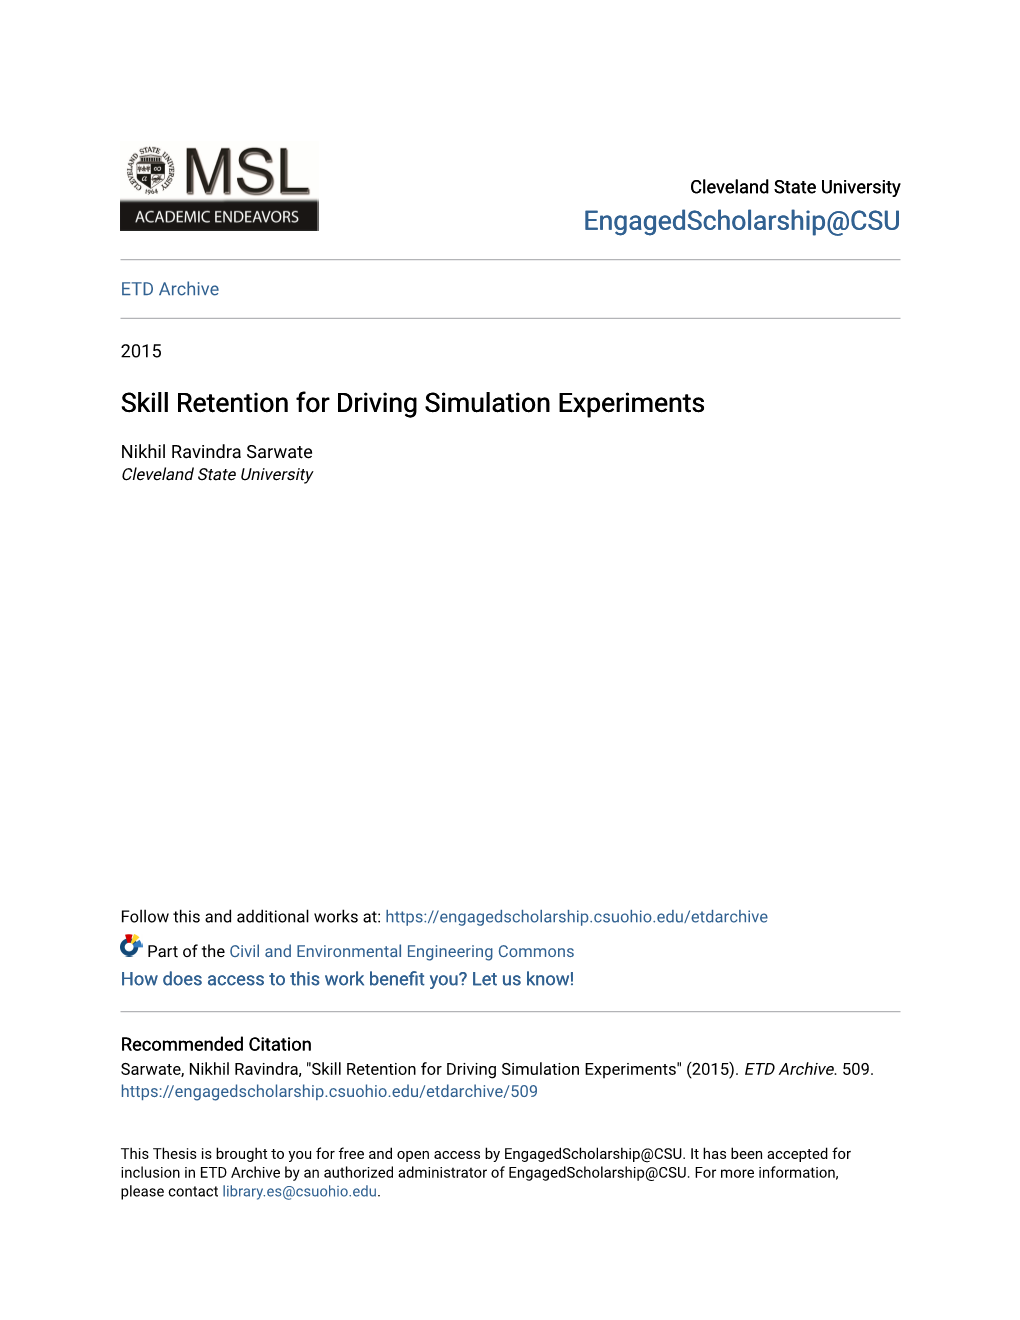 Skill Retention for Driving Simulation Experiments